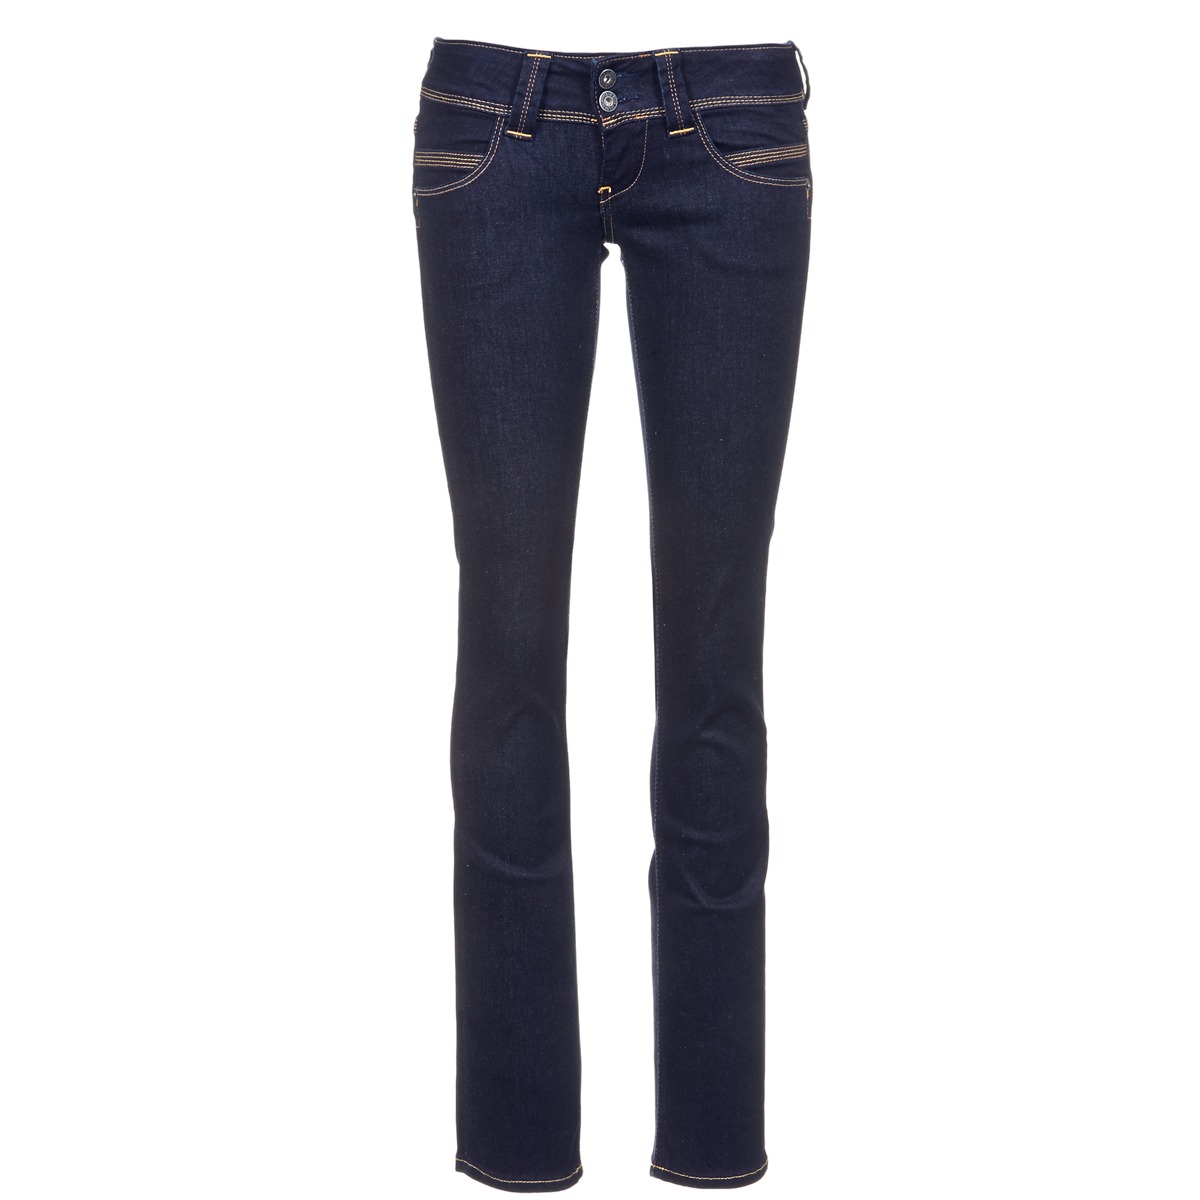 Pepe jeans VENUS Blue delivery - - Spartoo ! Free Clothing straight jeans / Women M15 NET 